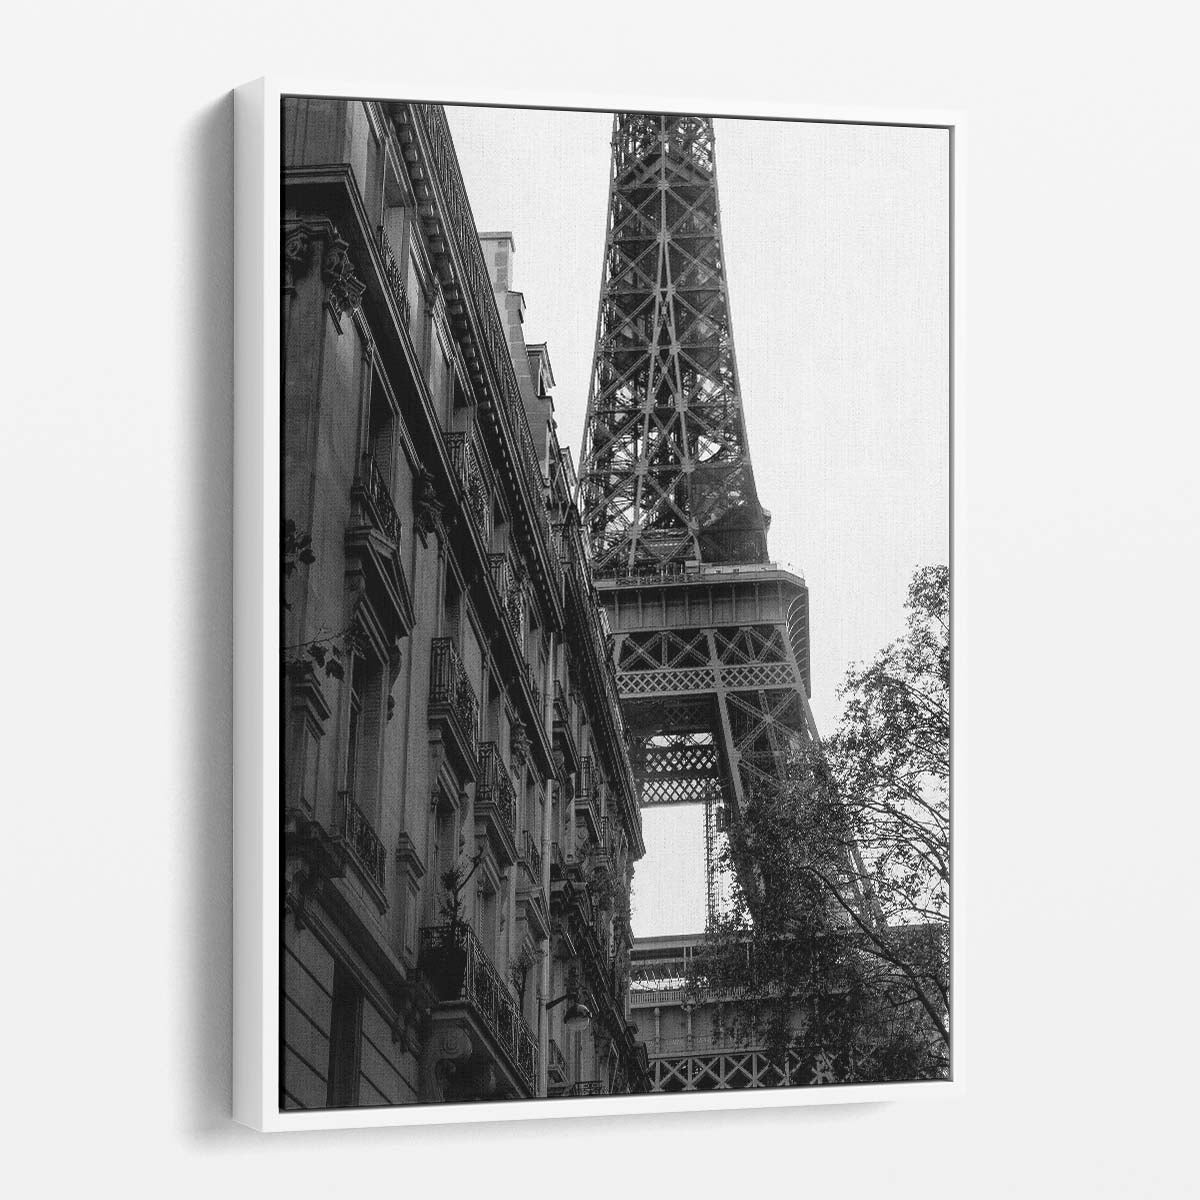 Paris Eiffel Tower Monochrome Photography, Iconic Urban Cityscape Wall Art by Luxuriance Designs, made in USA